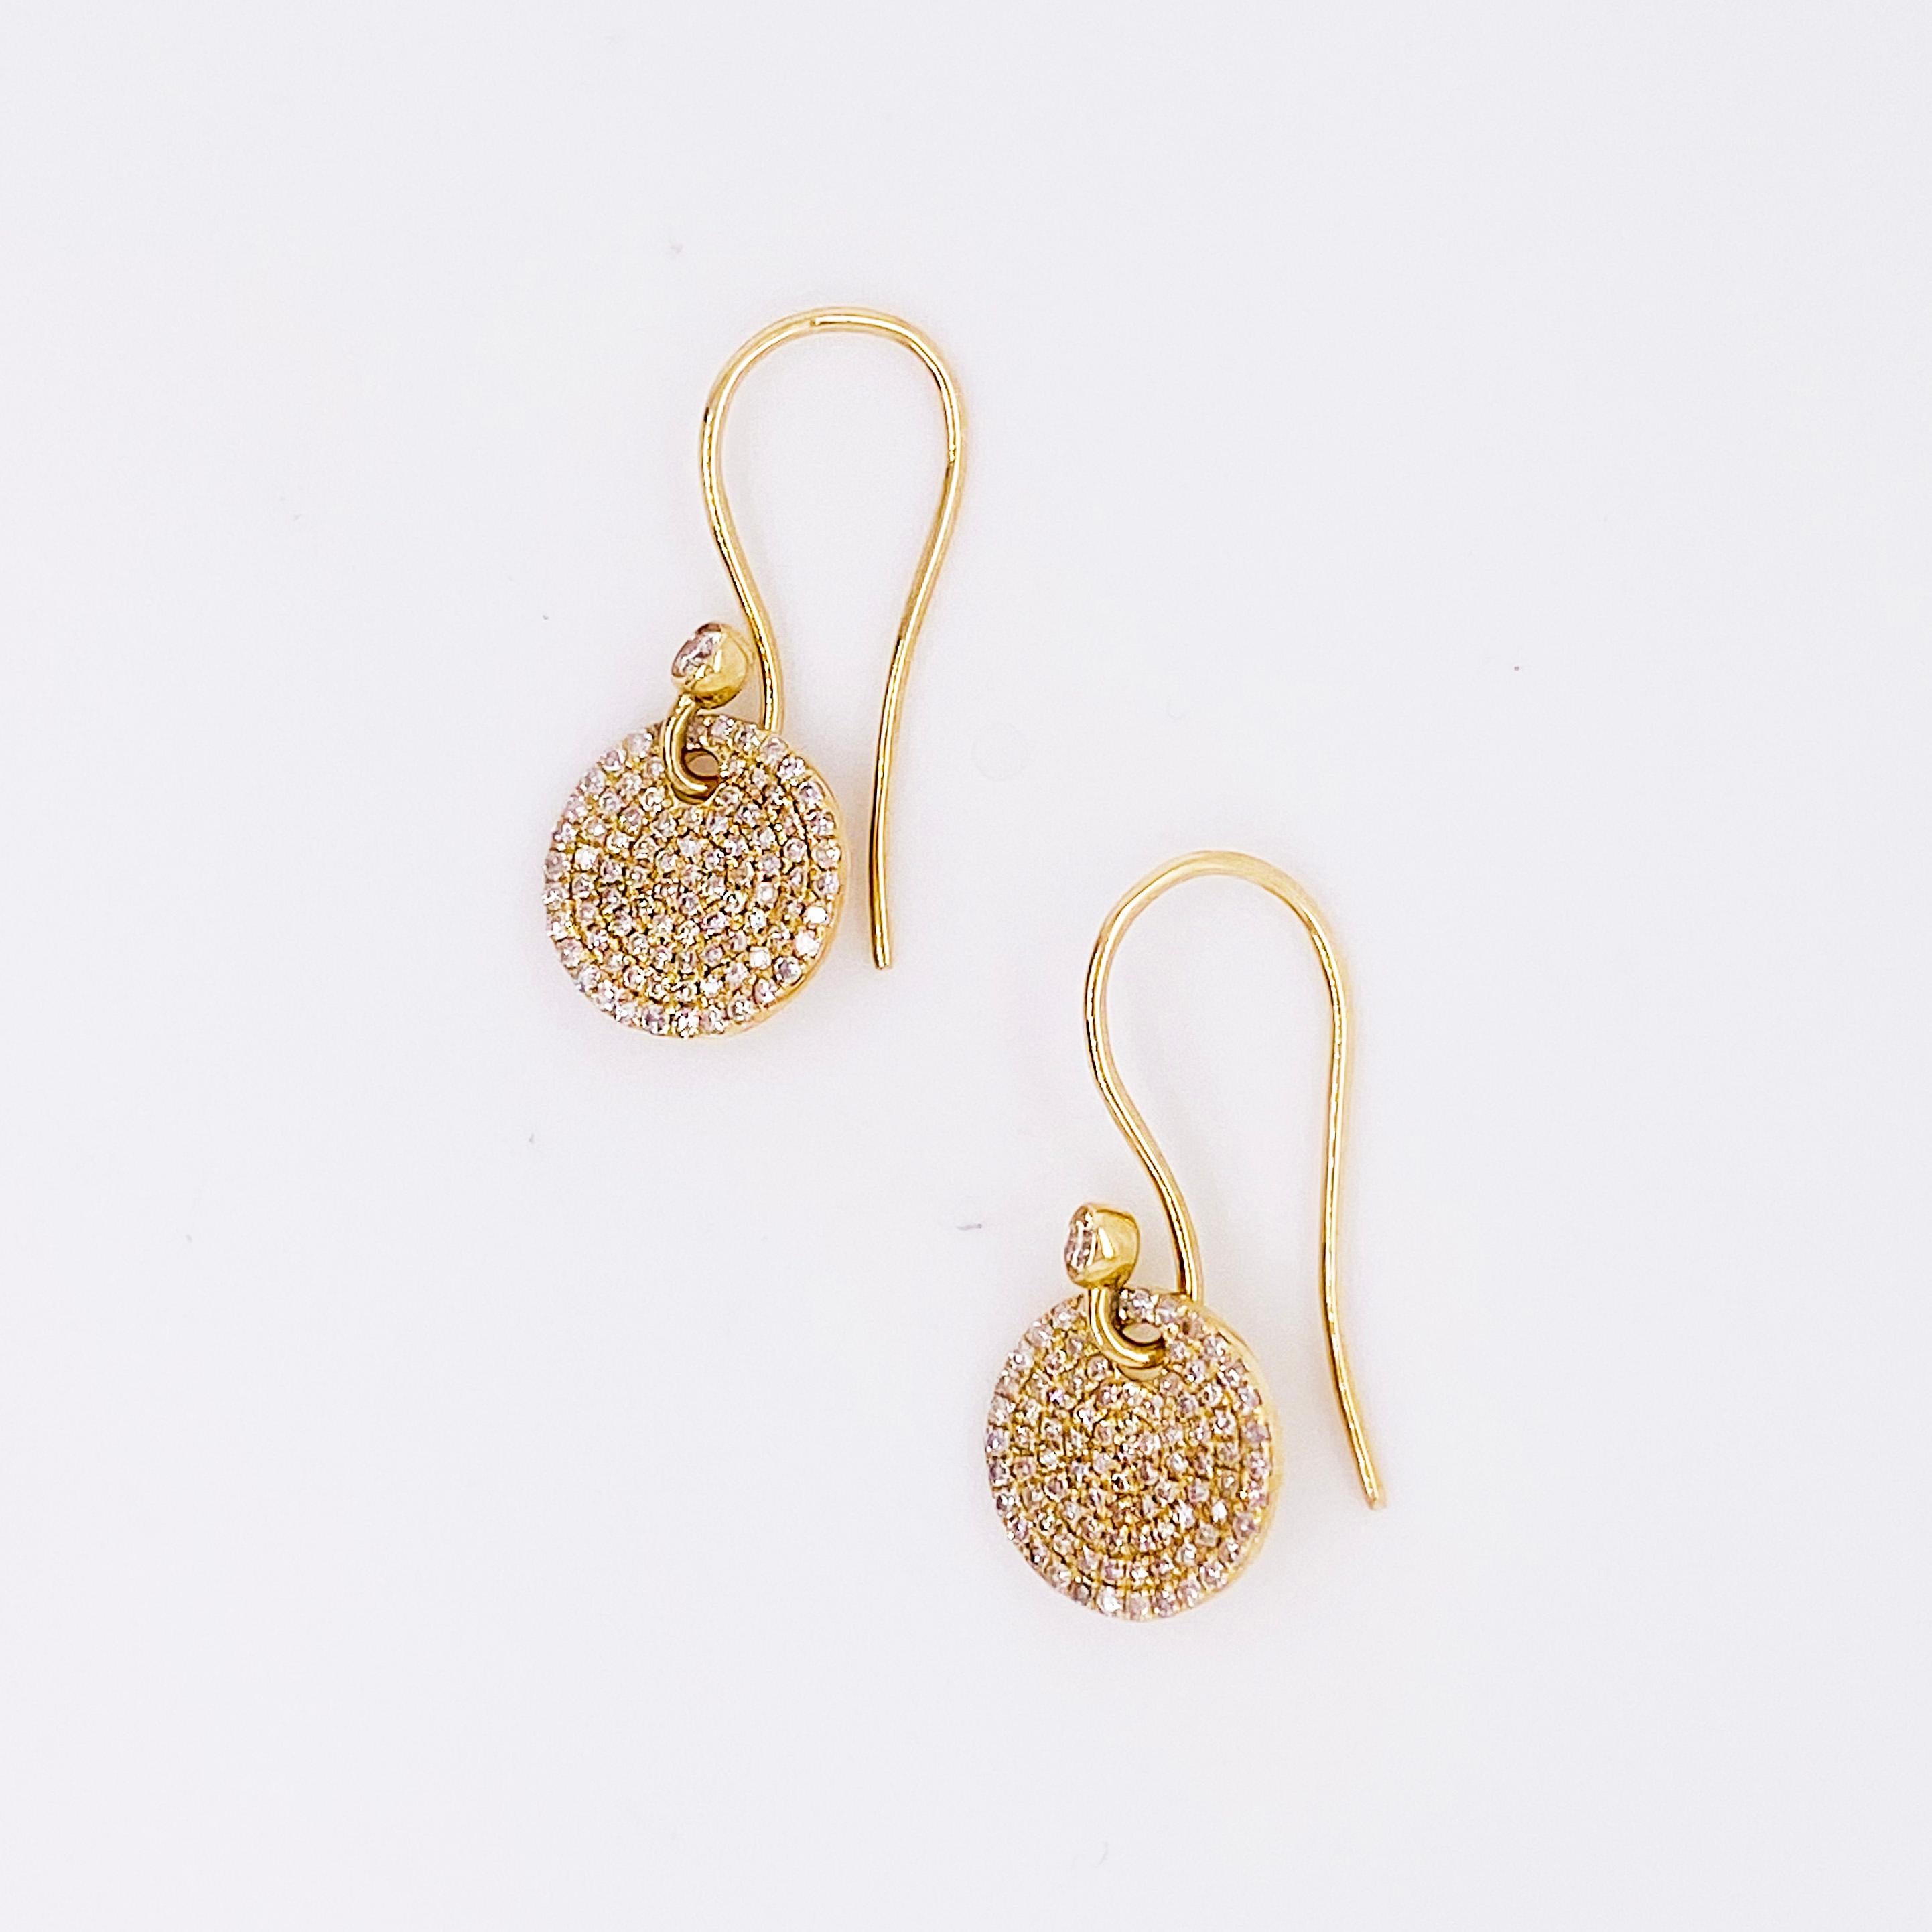 Would you like to sparkle and glitter from every angle?  It's possible with these amazing diamond disk earrings that are 200 pave set diamonds!  Pave means 